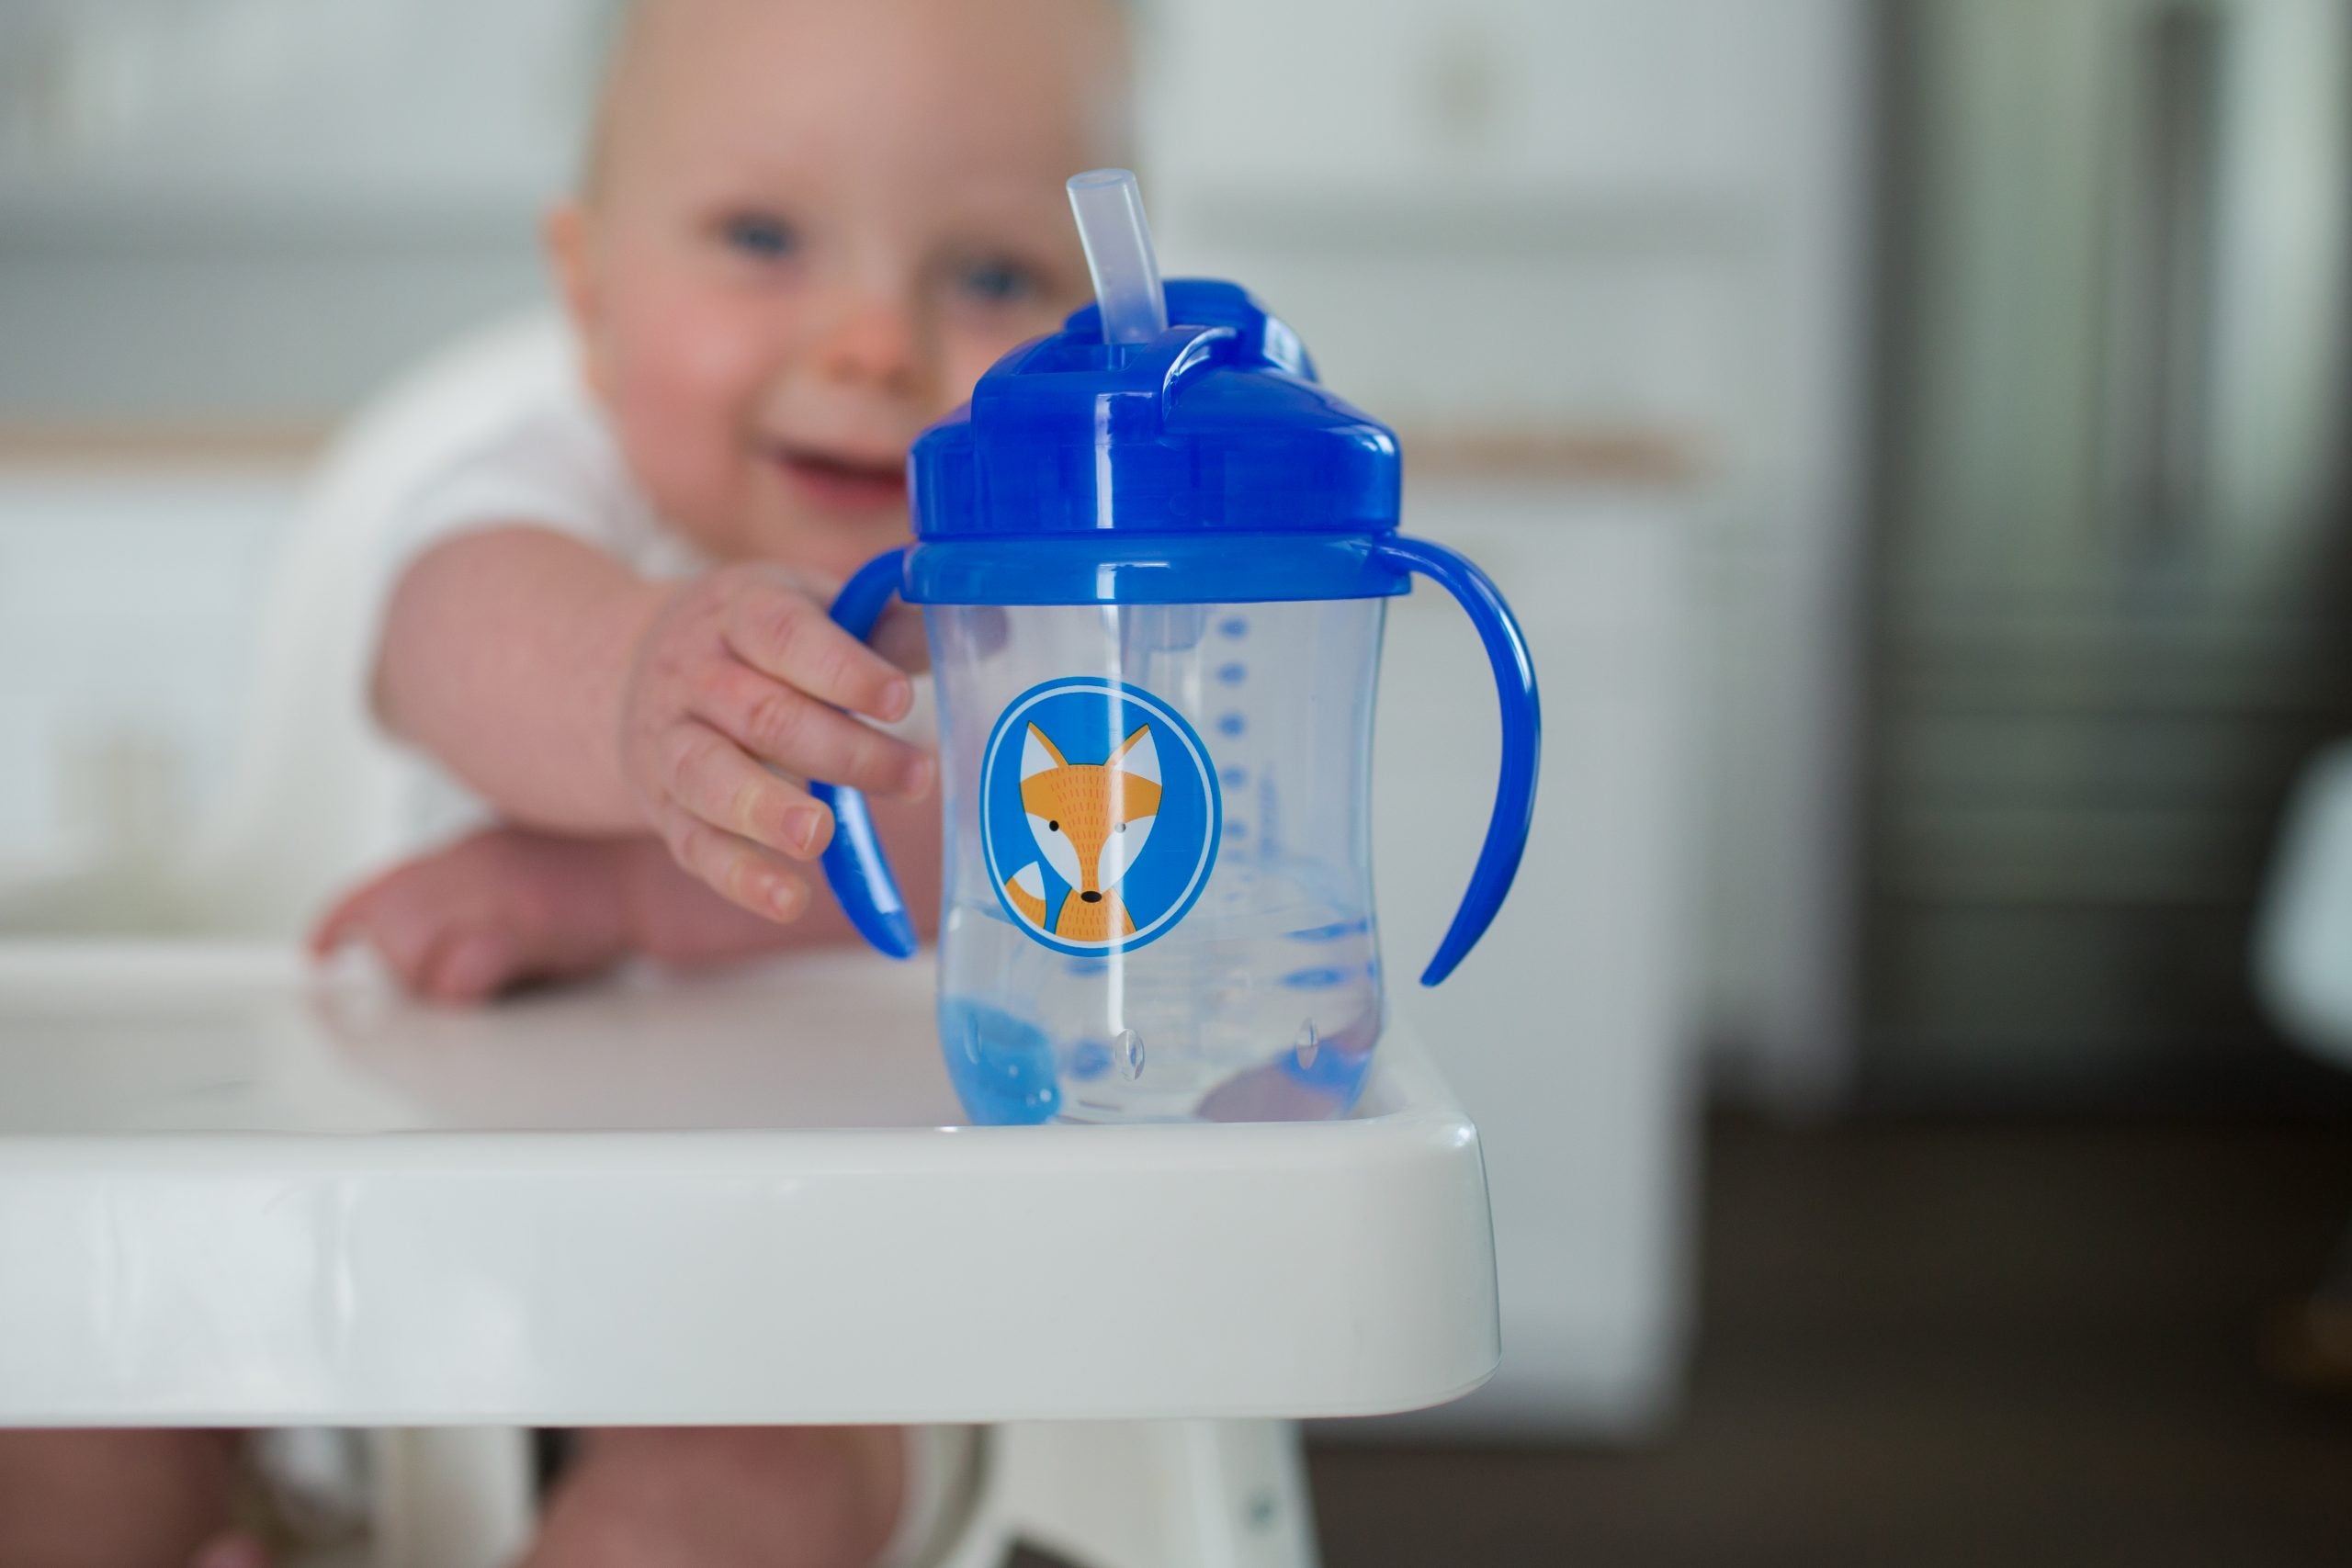 Dr. Brown's Baby's First Straw Cup - Blue